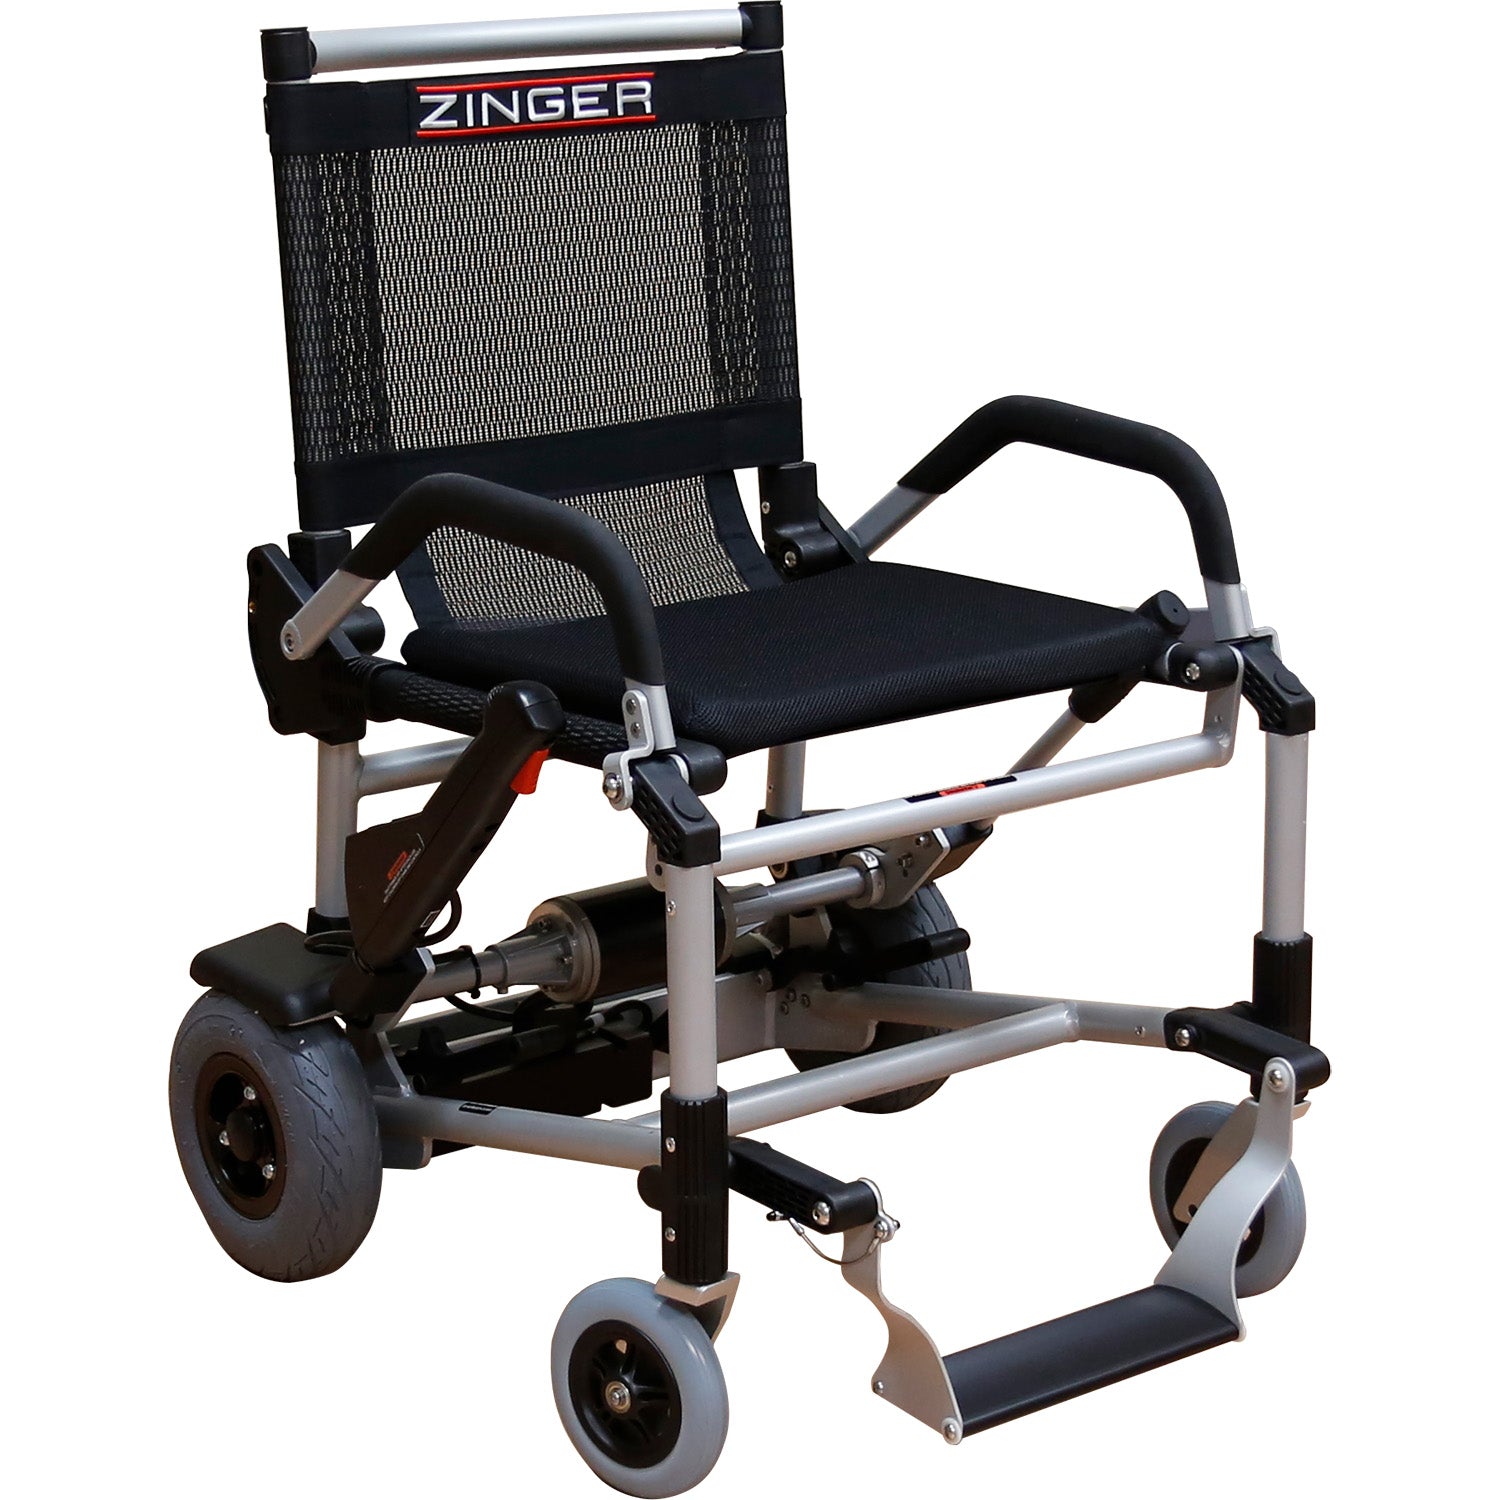 Certified Pre-owned Zinger® Folding Power Chair Two-Handed Control